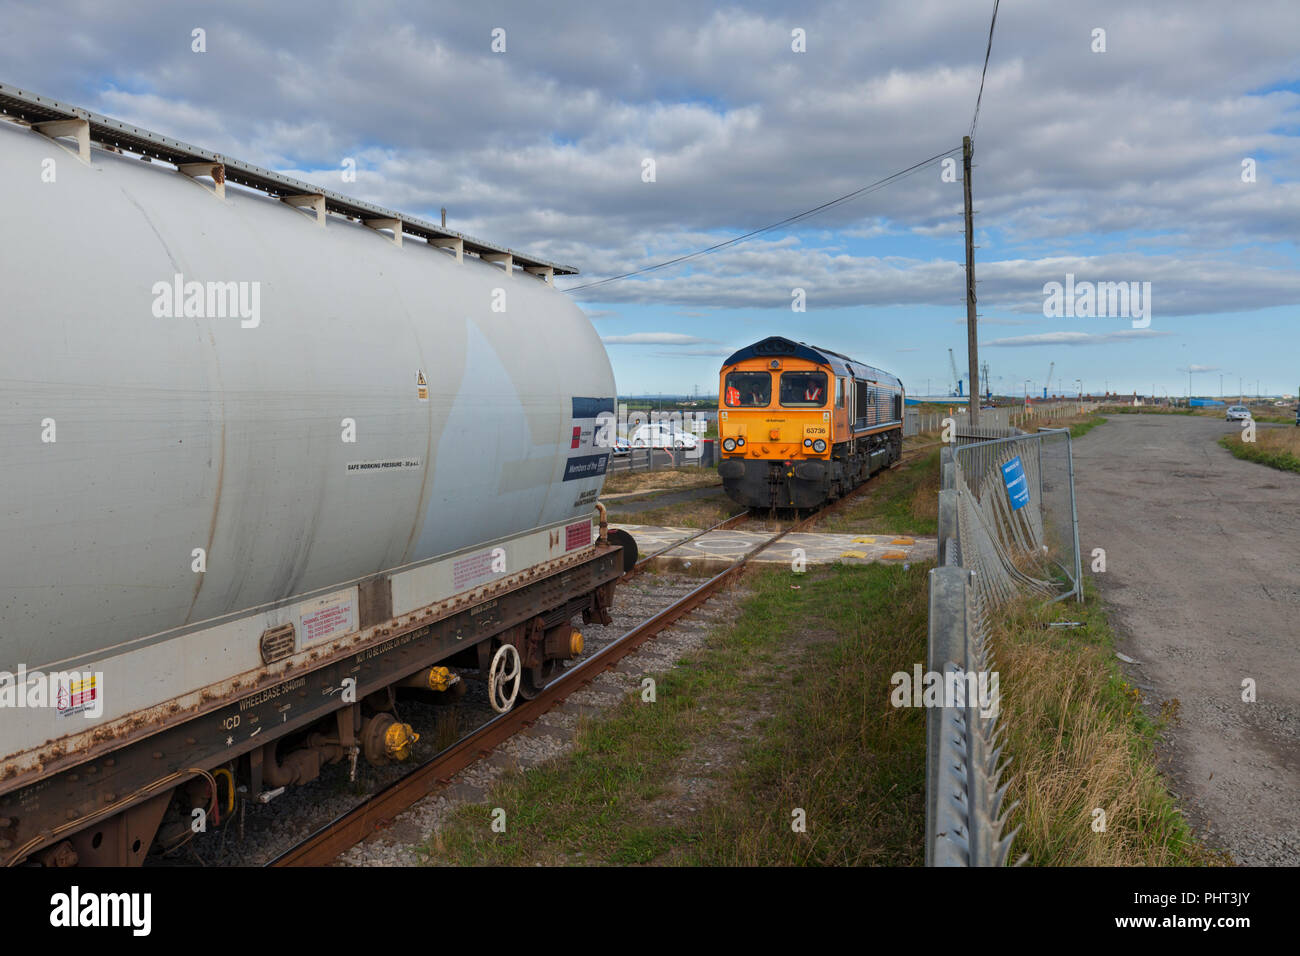 A GB Railfreigtht class 66 locomotive at North Blyth Alumina import terminal coupling up to a freight train carrying imported Alumina Stock Photo